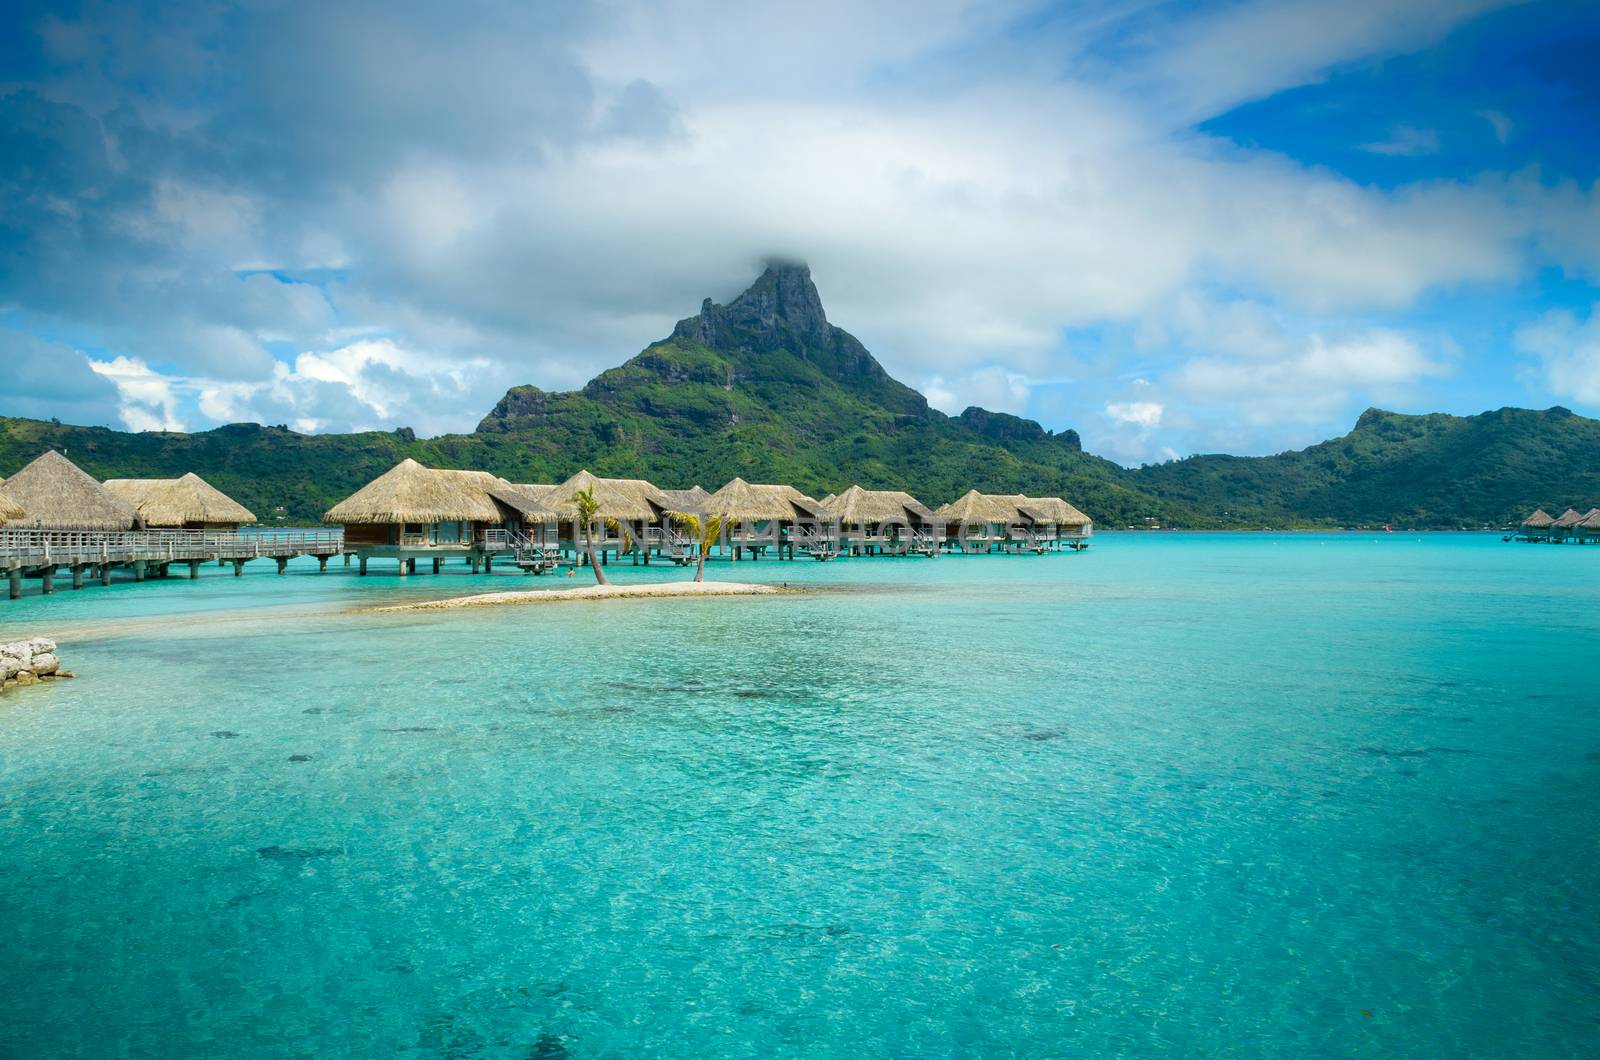 Luxury overwater thatched roof bungalow resort in a vacation resort in the clear blue lagoon with a view on the tropical island of Bora Bora, near Tahiti, in French Polynesia.